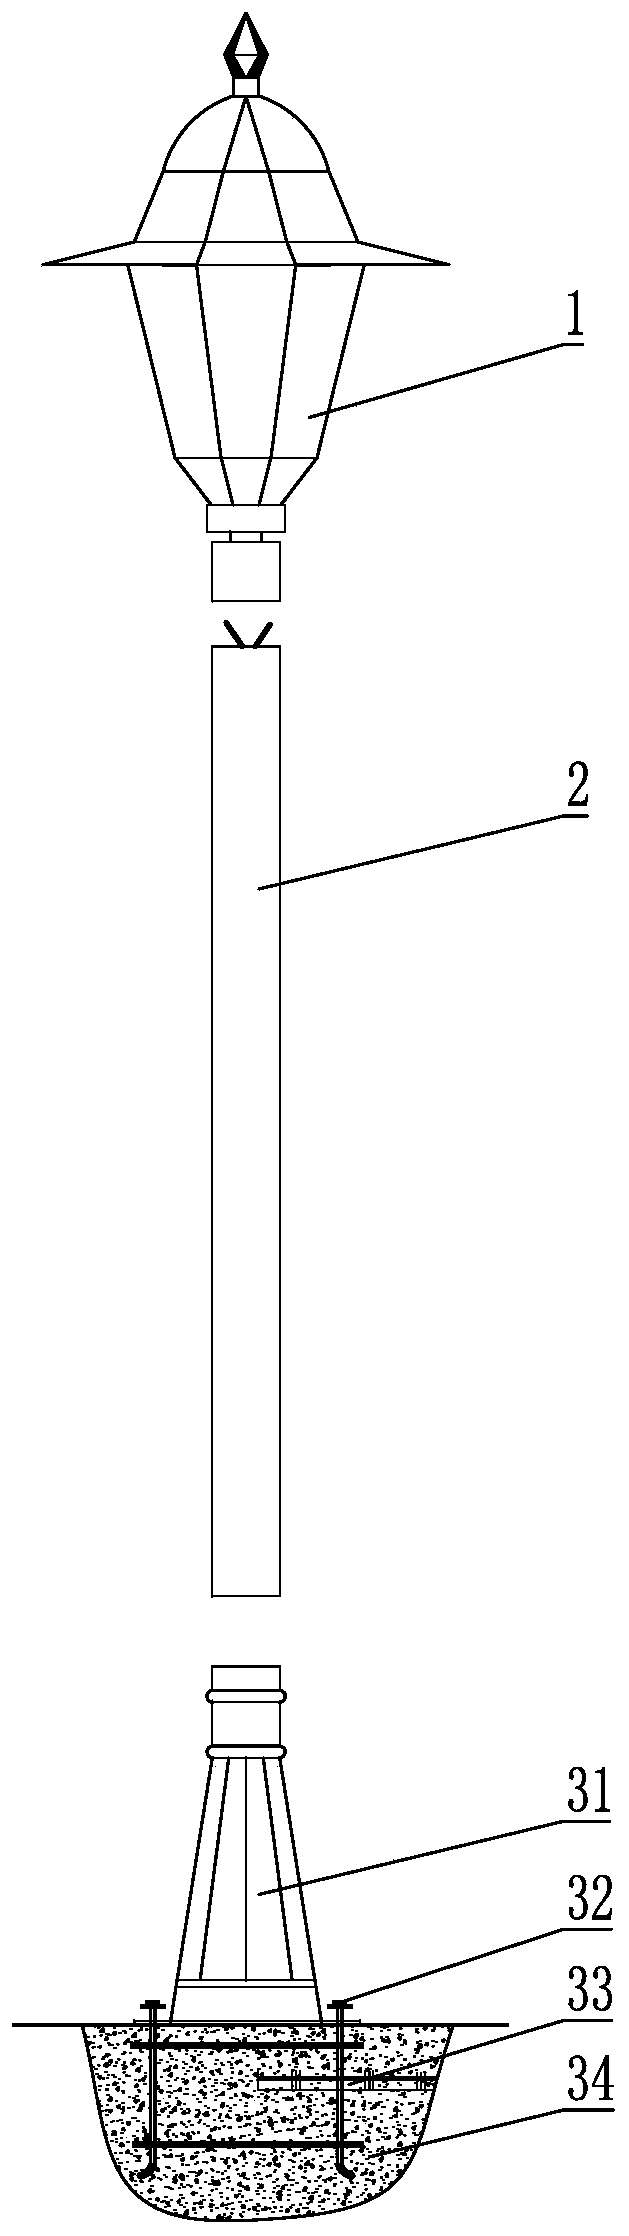 Street lamp structure with built-in antenna